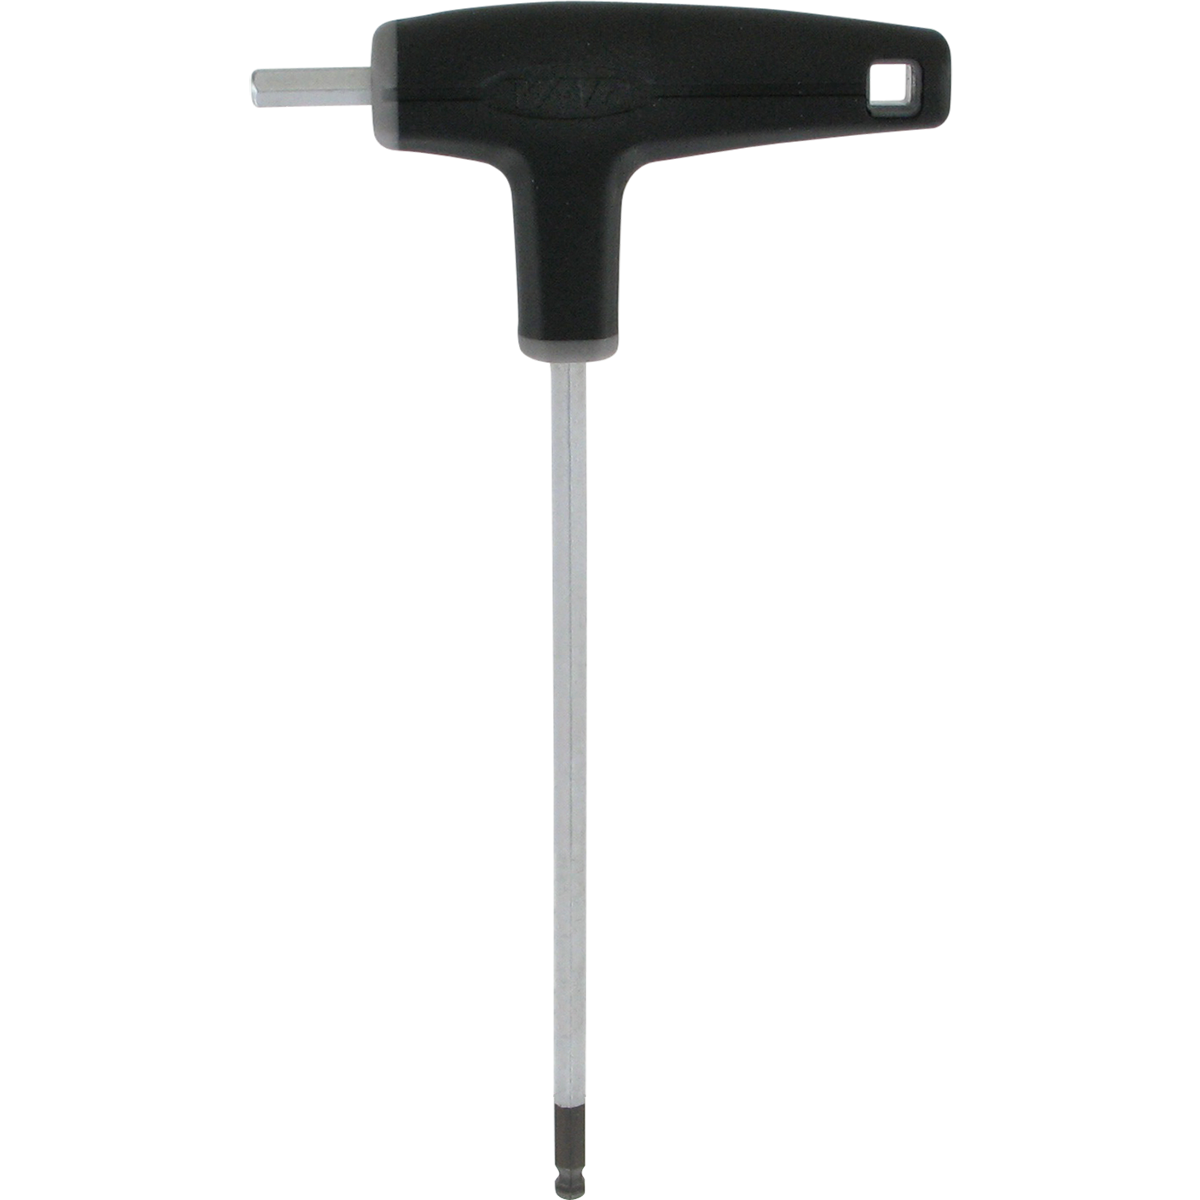 4mm P-handled hex wrench with a ball-end